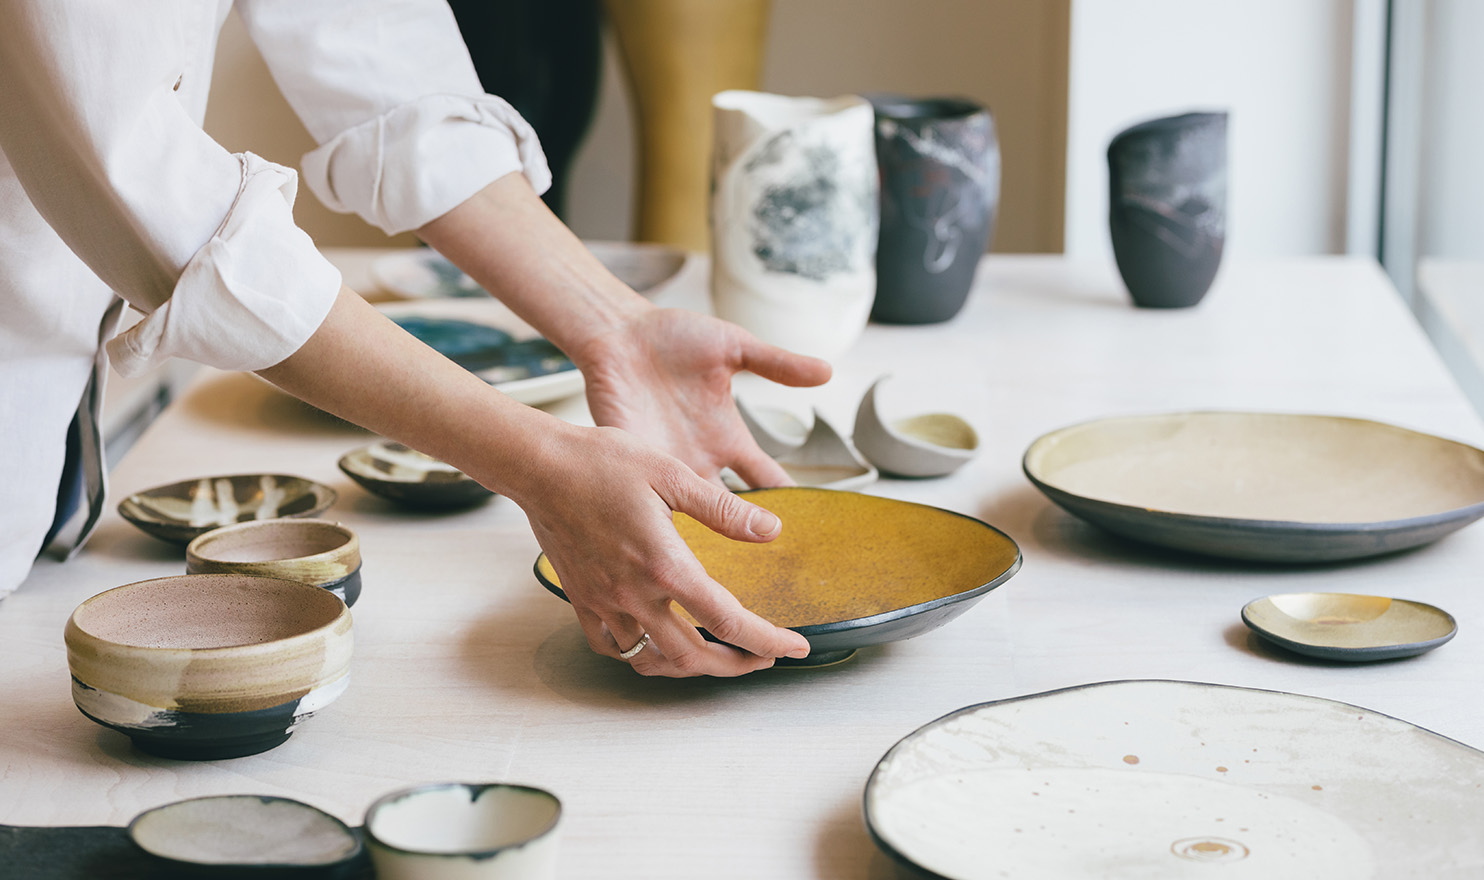 A woman's hands are carefully setting down a handmade plate on a white table next to other pieces of handmade pottery.